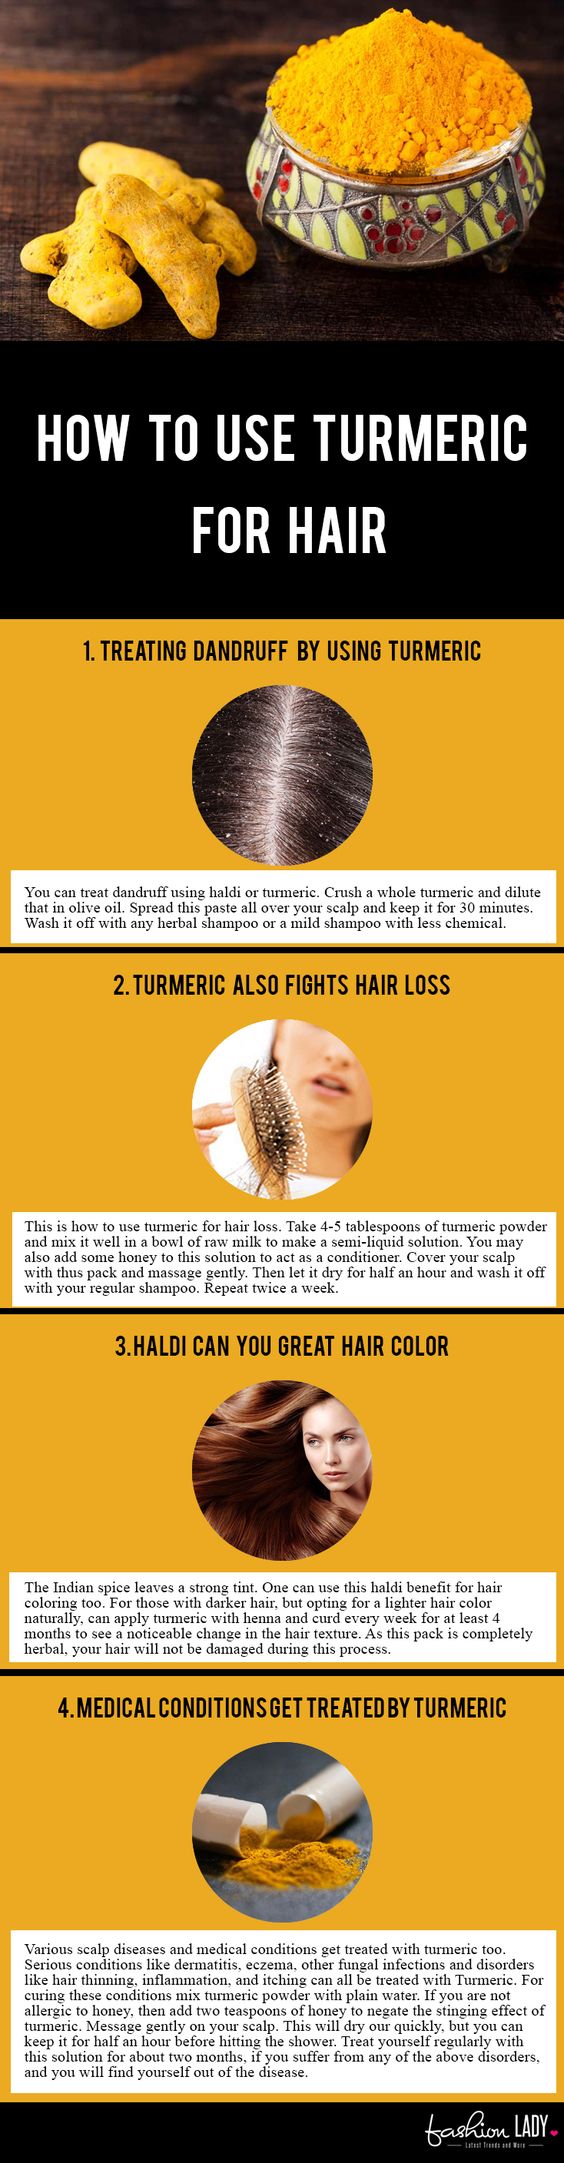 Super Easy Ways To Use Turmeric For Hair Care